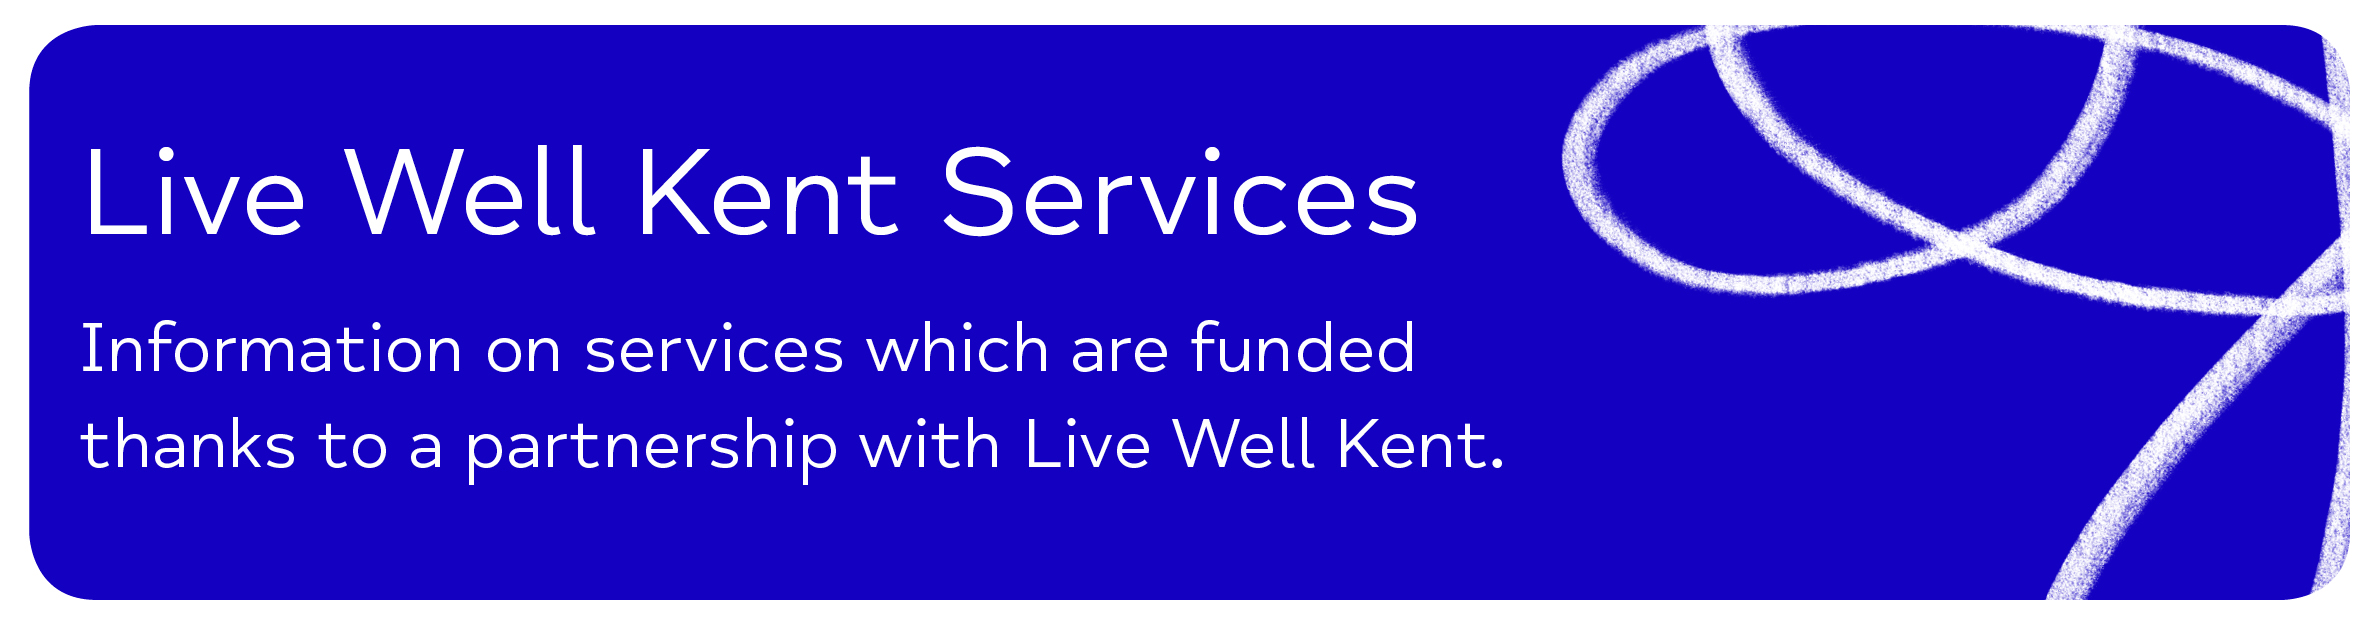 Live Well Kent Services Information on services which are funded thanks to a partnership with Live Well Kent. 